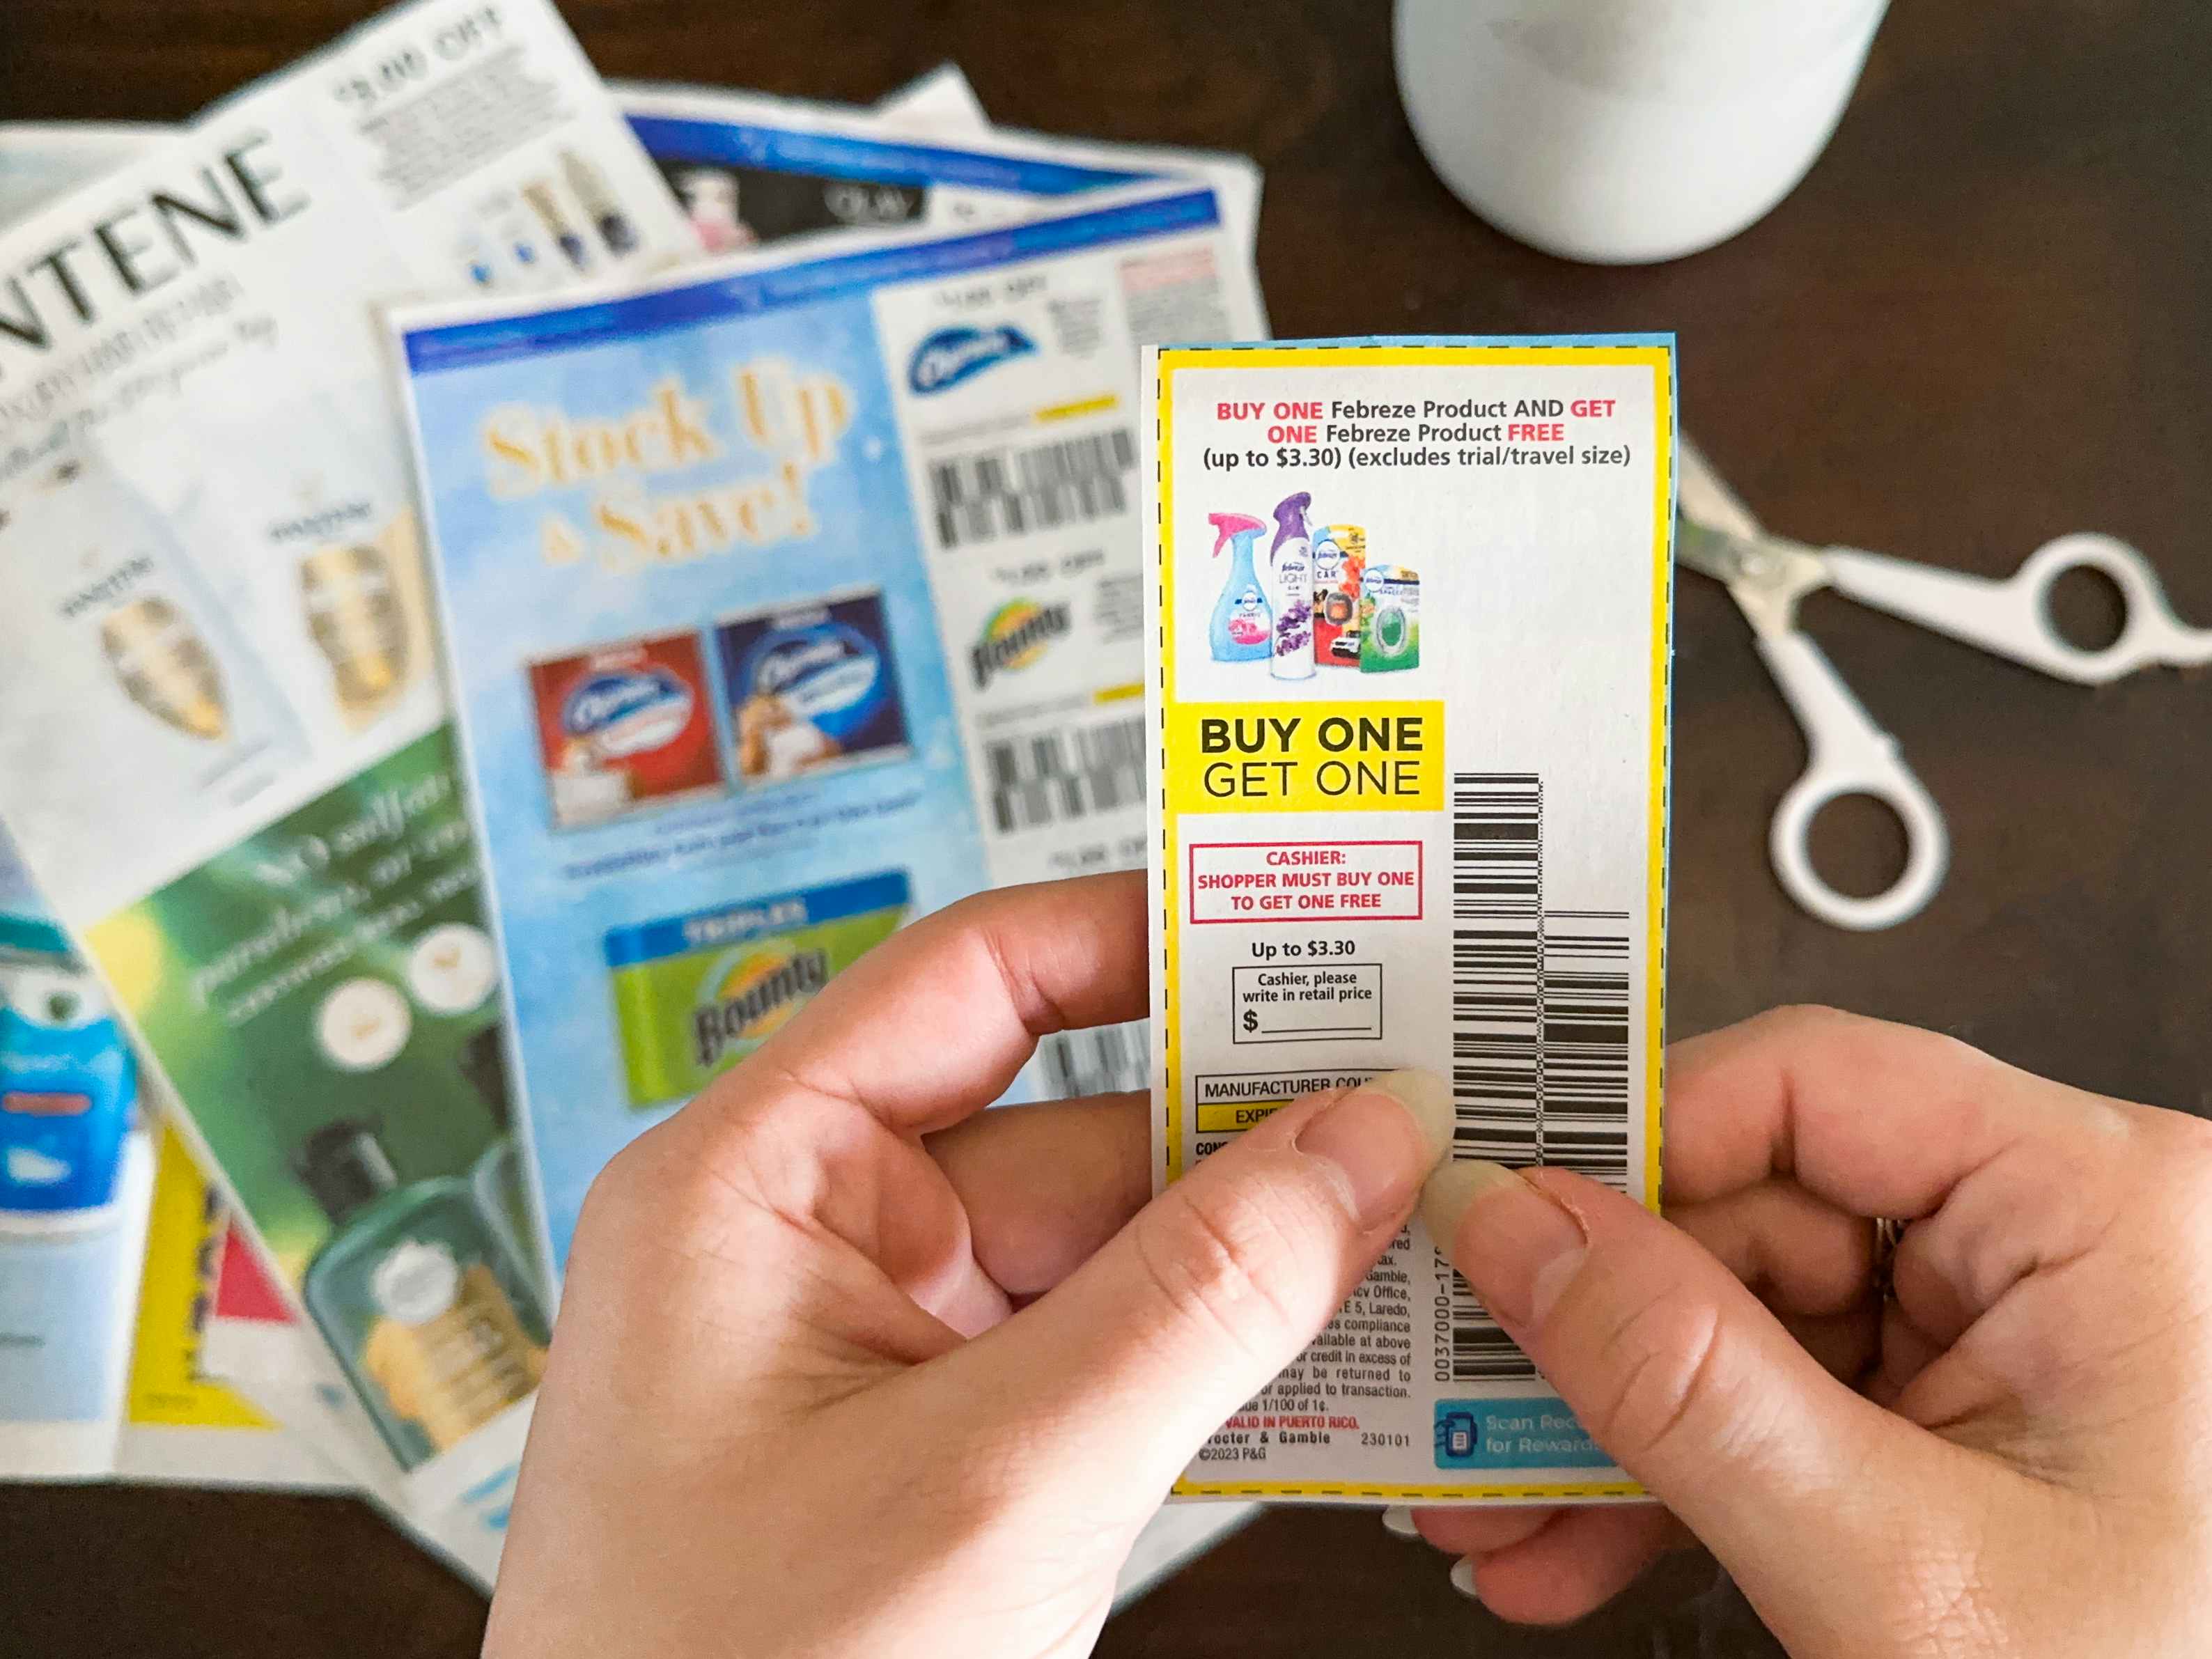 https://prod-cdn-thekrazycouponlady.imgix.net/wp-content/uploads/2019/04/how-to-coupon-at-cvs-buy-one-get-one-free-manufacturer-coupon-cutting-newspaper-1672942593-1672942593.jpg?auto=format&fit=fill&q=25